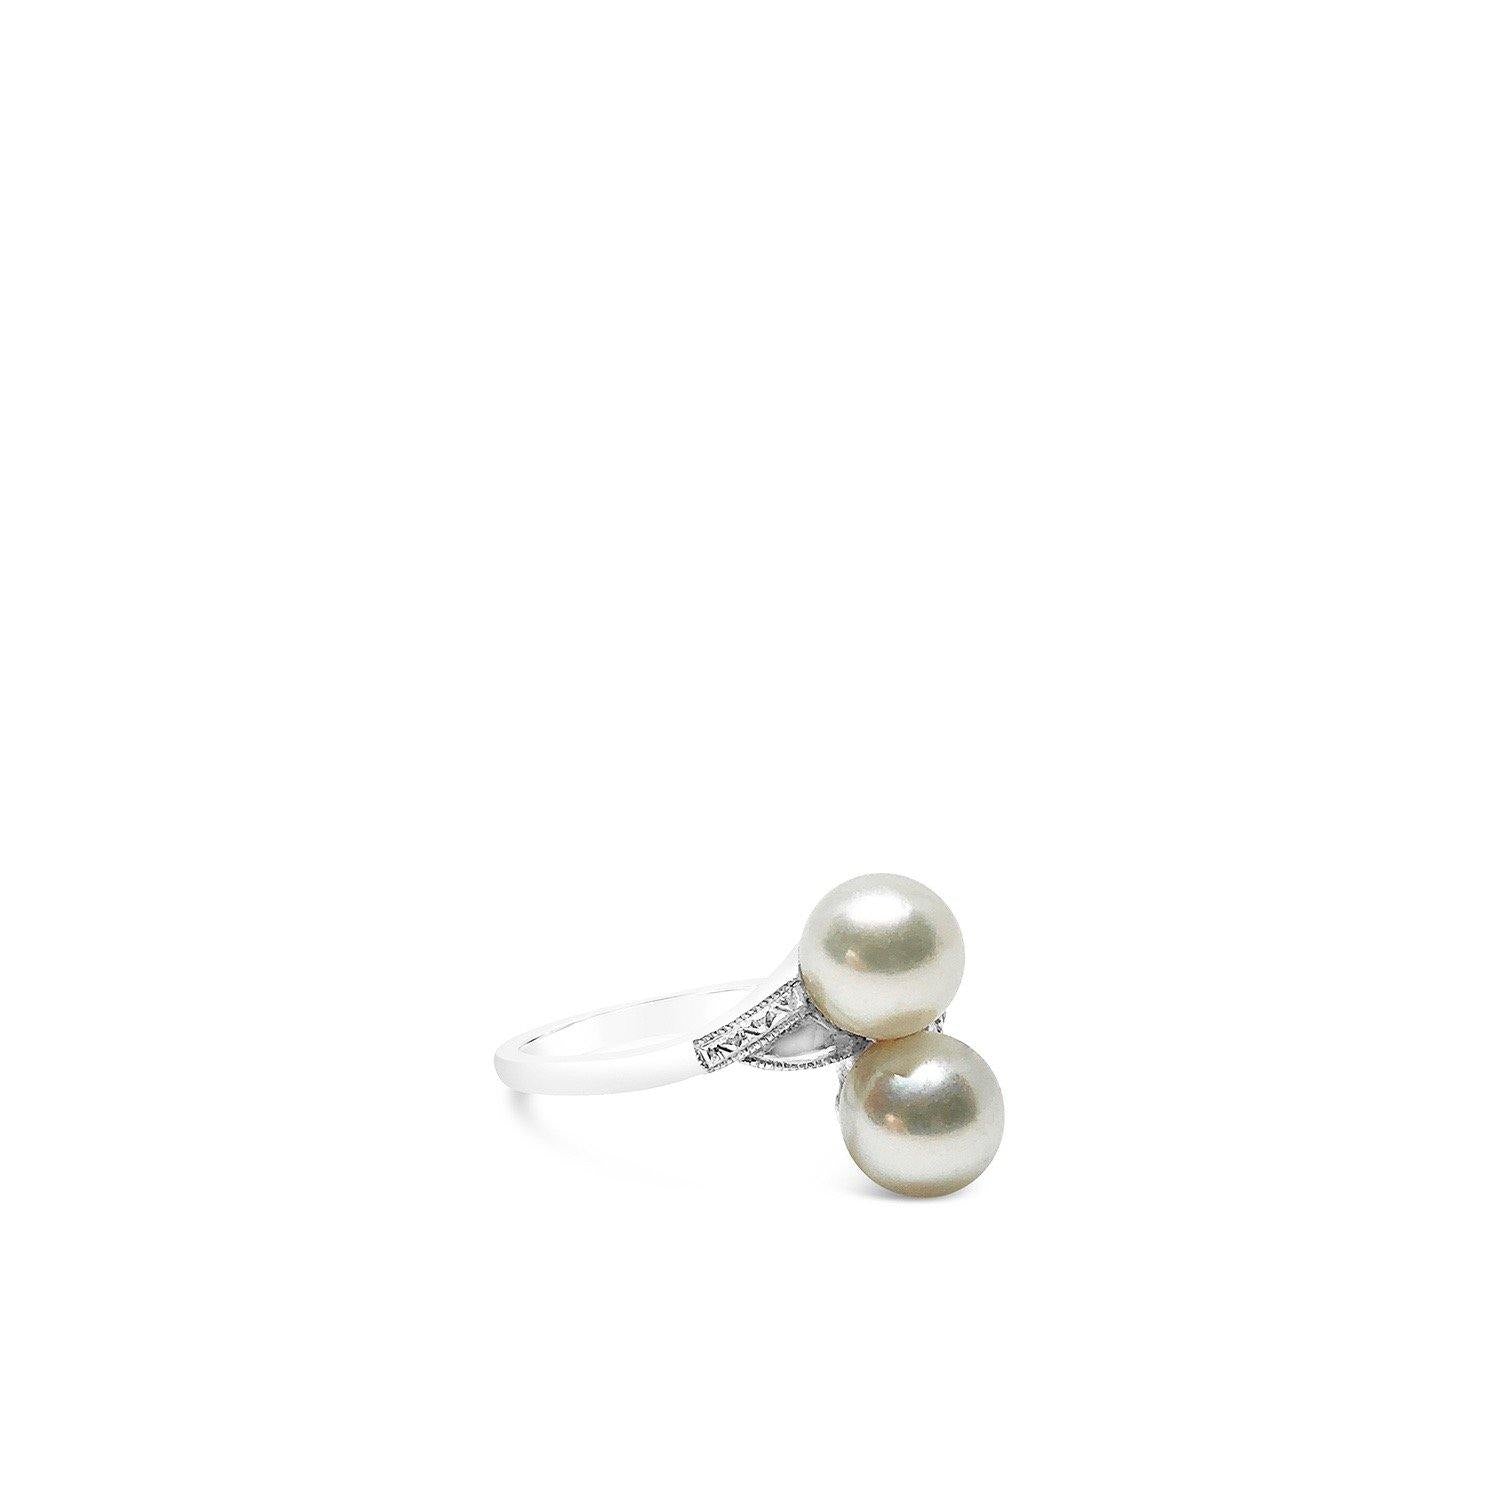 Mikimoto Engraved Bypass Japanese Saltwater Akoya Cultured Pearl Ring- Sterling Silver